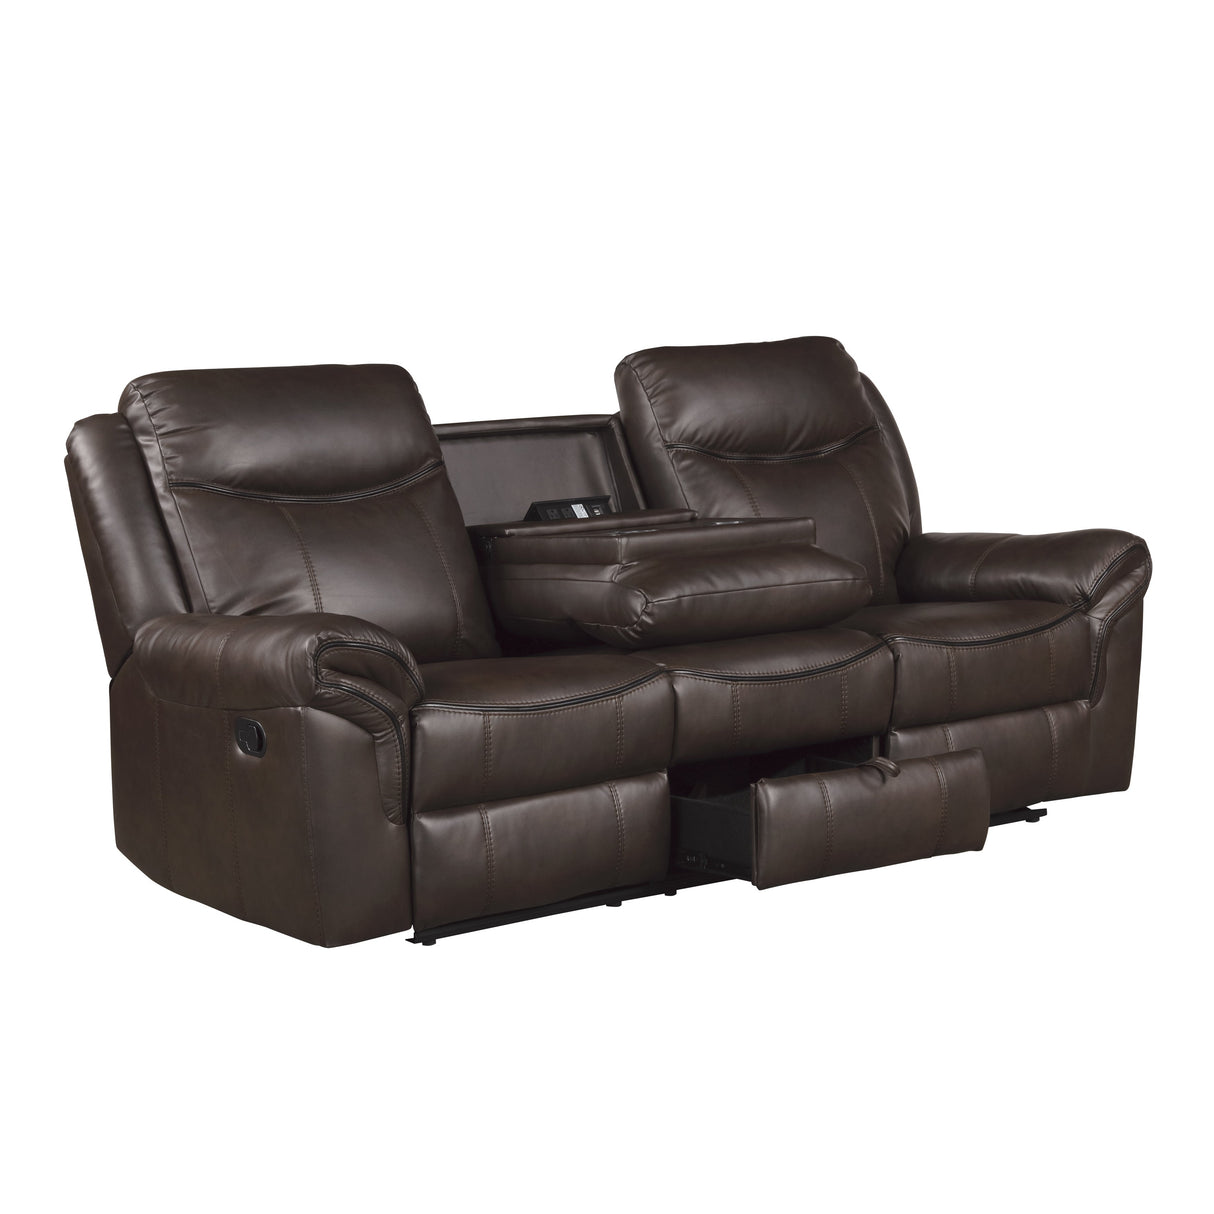 Aram Dark Brown Faux Leather Double Reclining Sofa with Center Drop-Down Cup Holders, Receptacles, Hidden Drawer and USB Ports